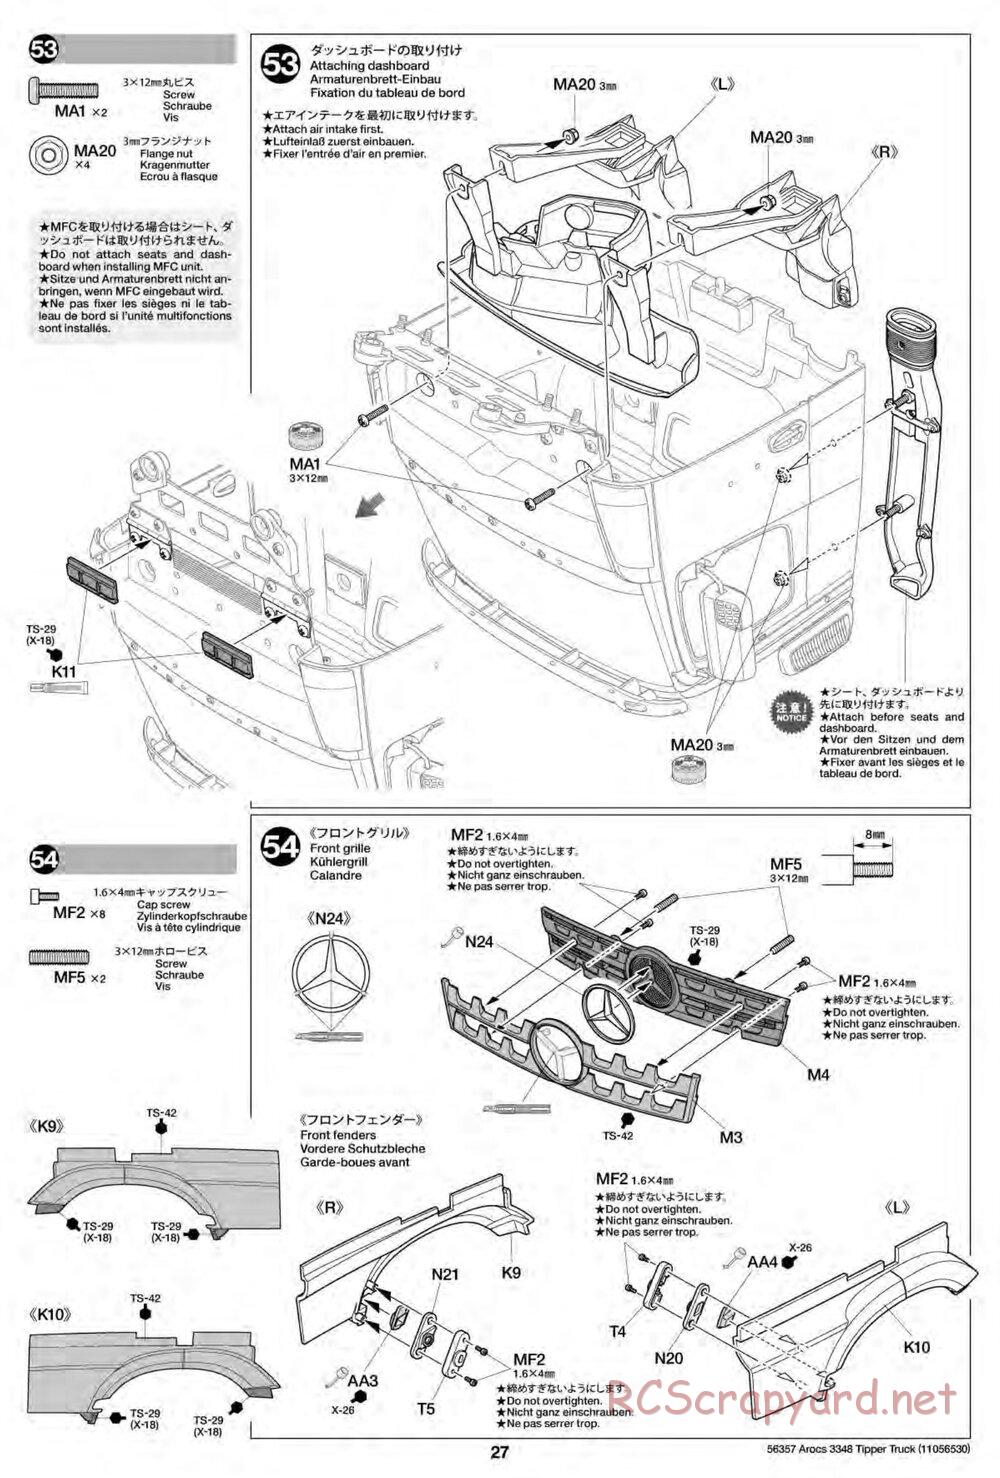 Tamiya - Mercedes-Benz Arocs 3348 6x4 Tipper Truck Chassis - Manual - Page 27